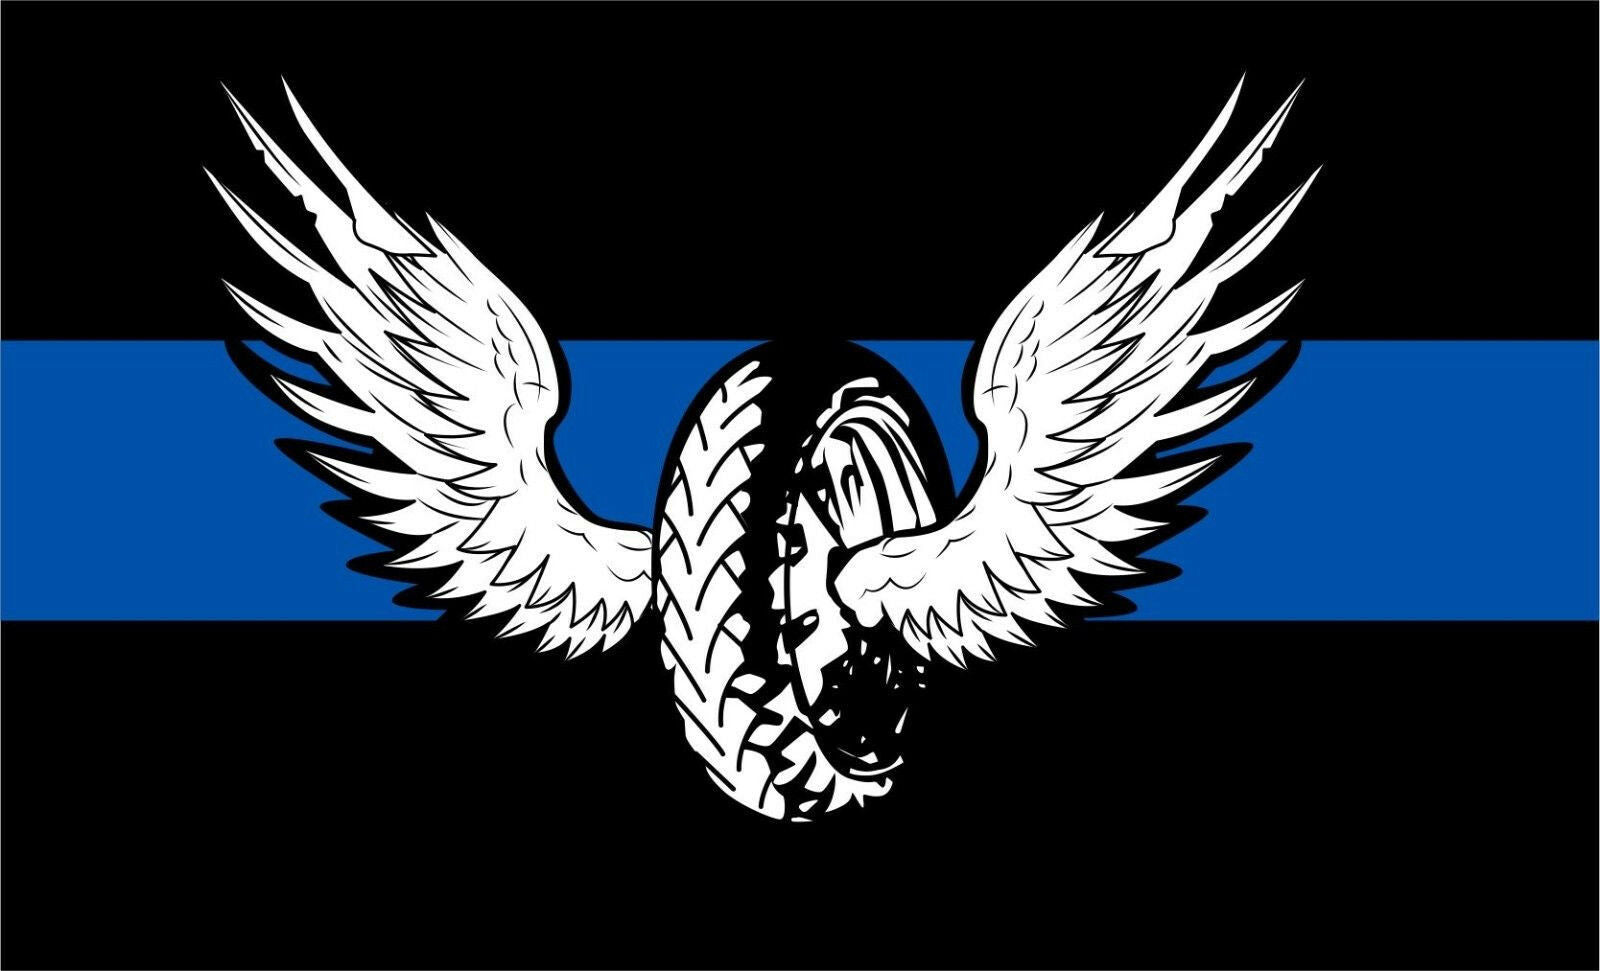 Thin Blue Line Decal -Forward Facing Motorcycle with wings REFLECTIVE  free Ship - Powercall Sirens LLC